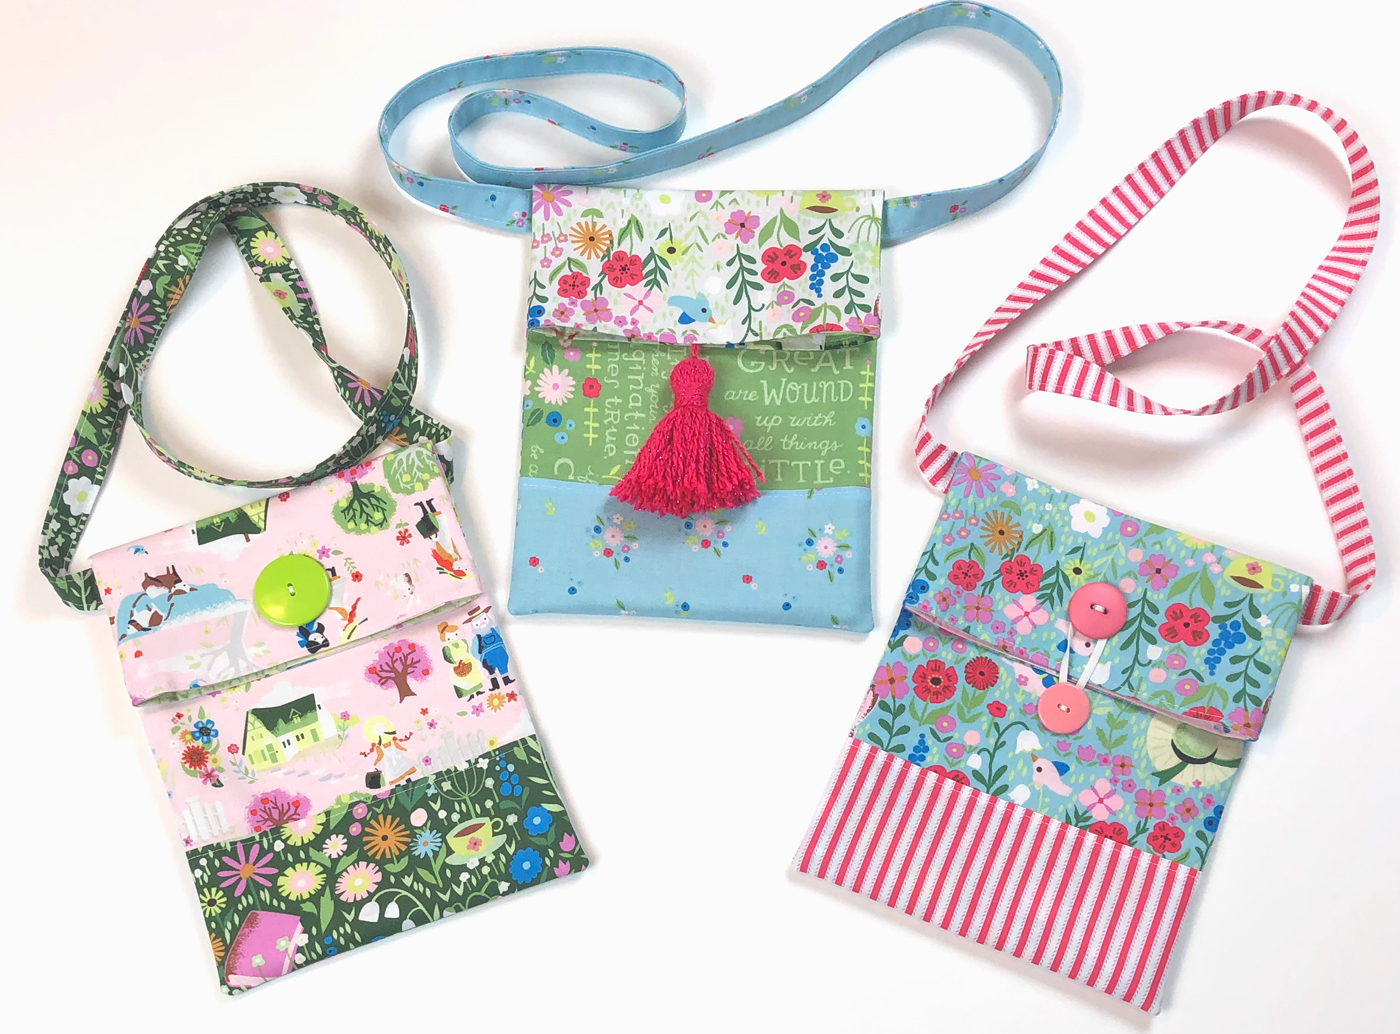 Ameroonie Designs: How to sew a simple sling bag for kids